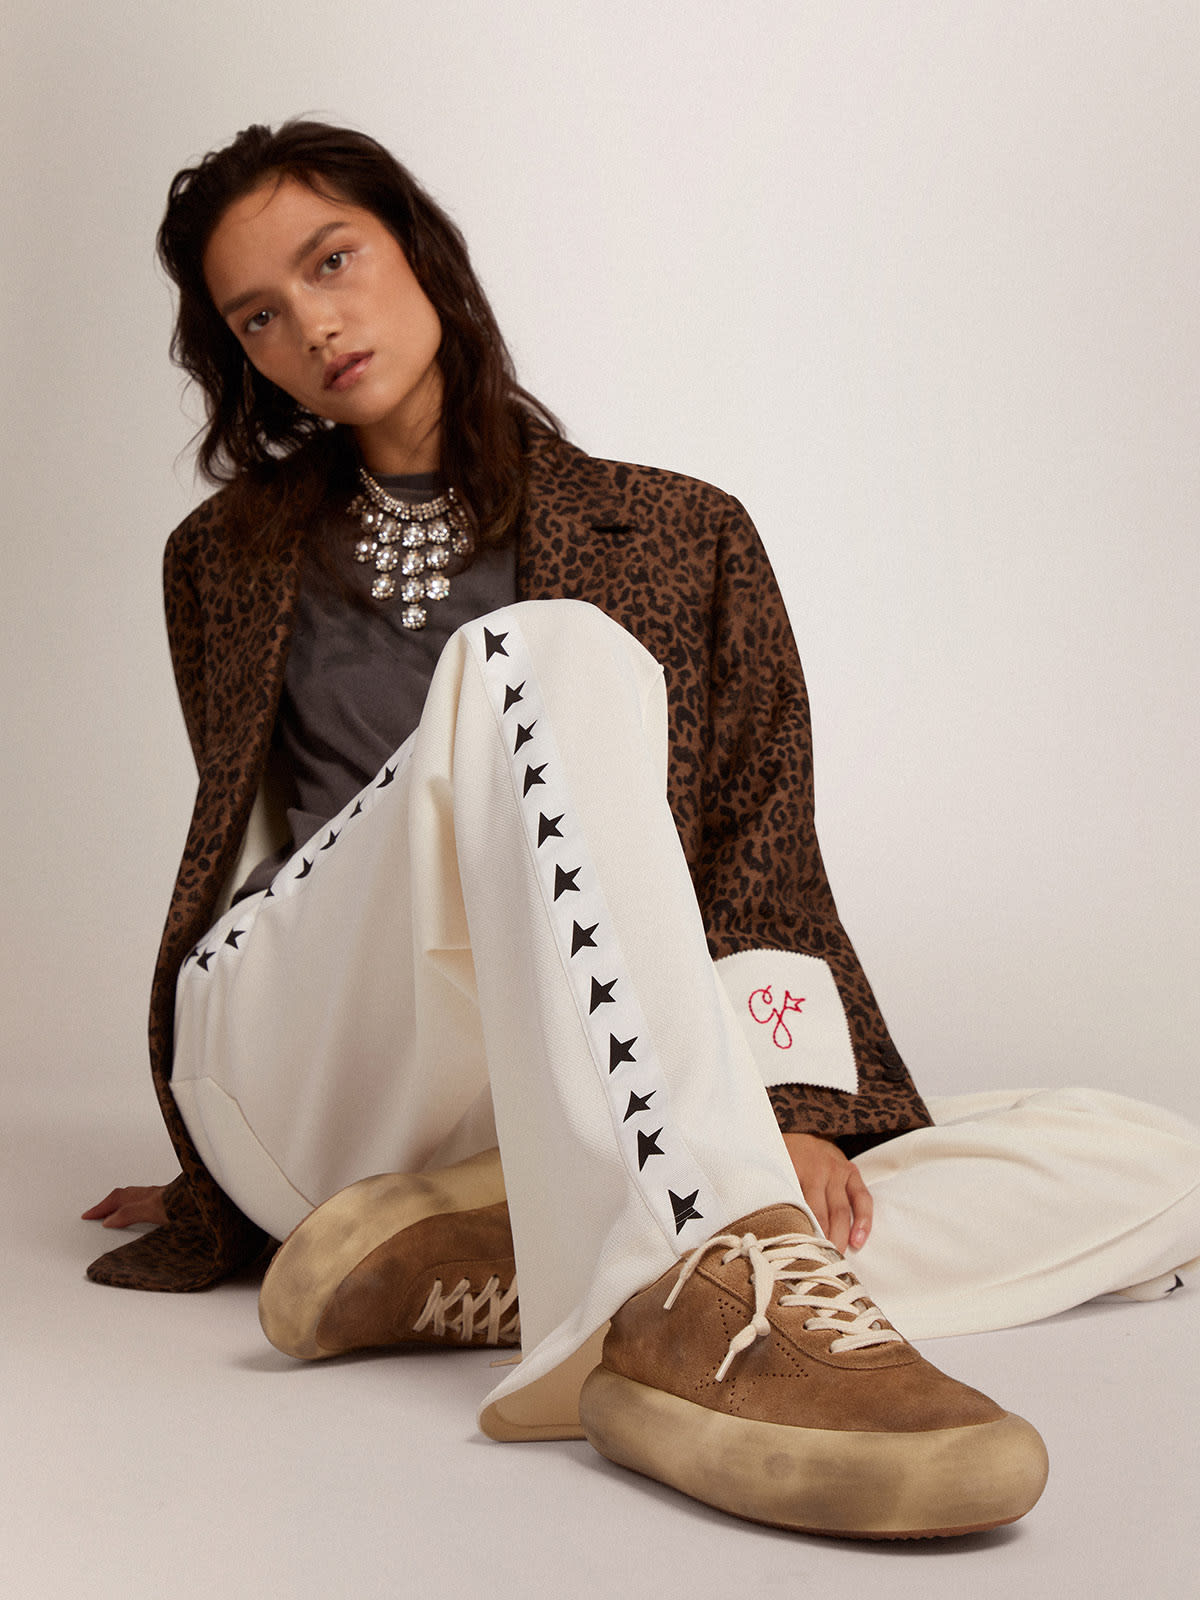 Golden Goose - Scarpe Space-Star Donna in suede color tabacco e fodera in shearling in 